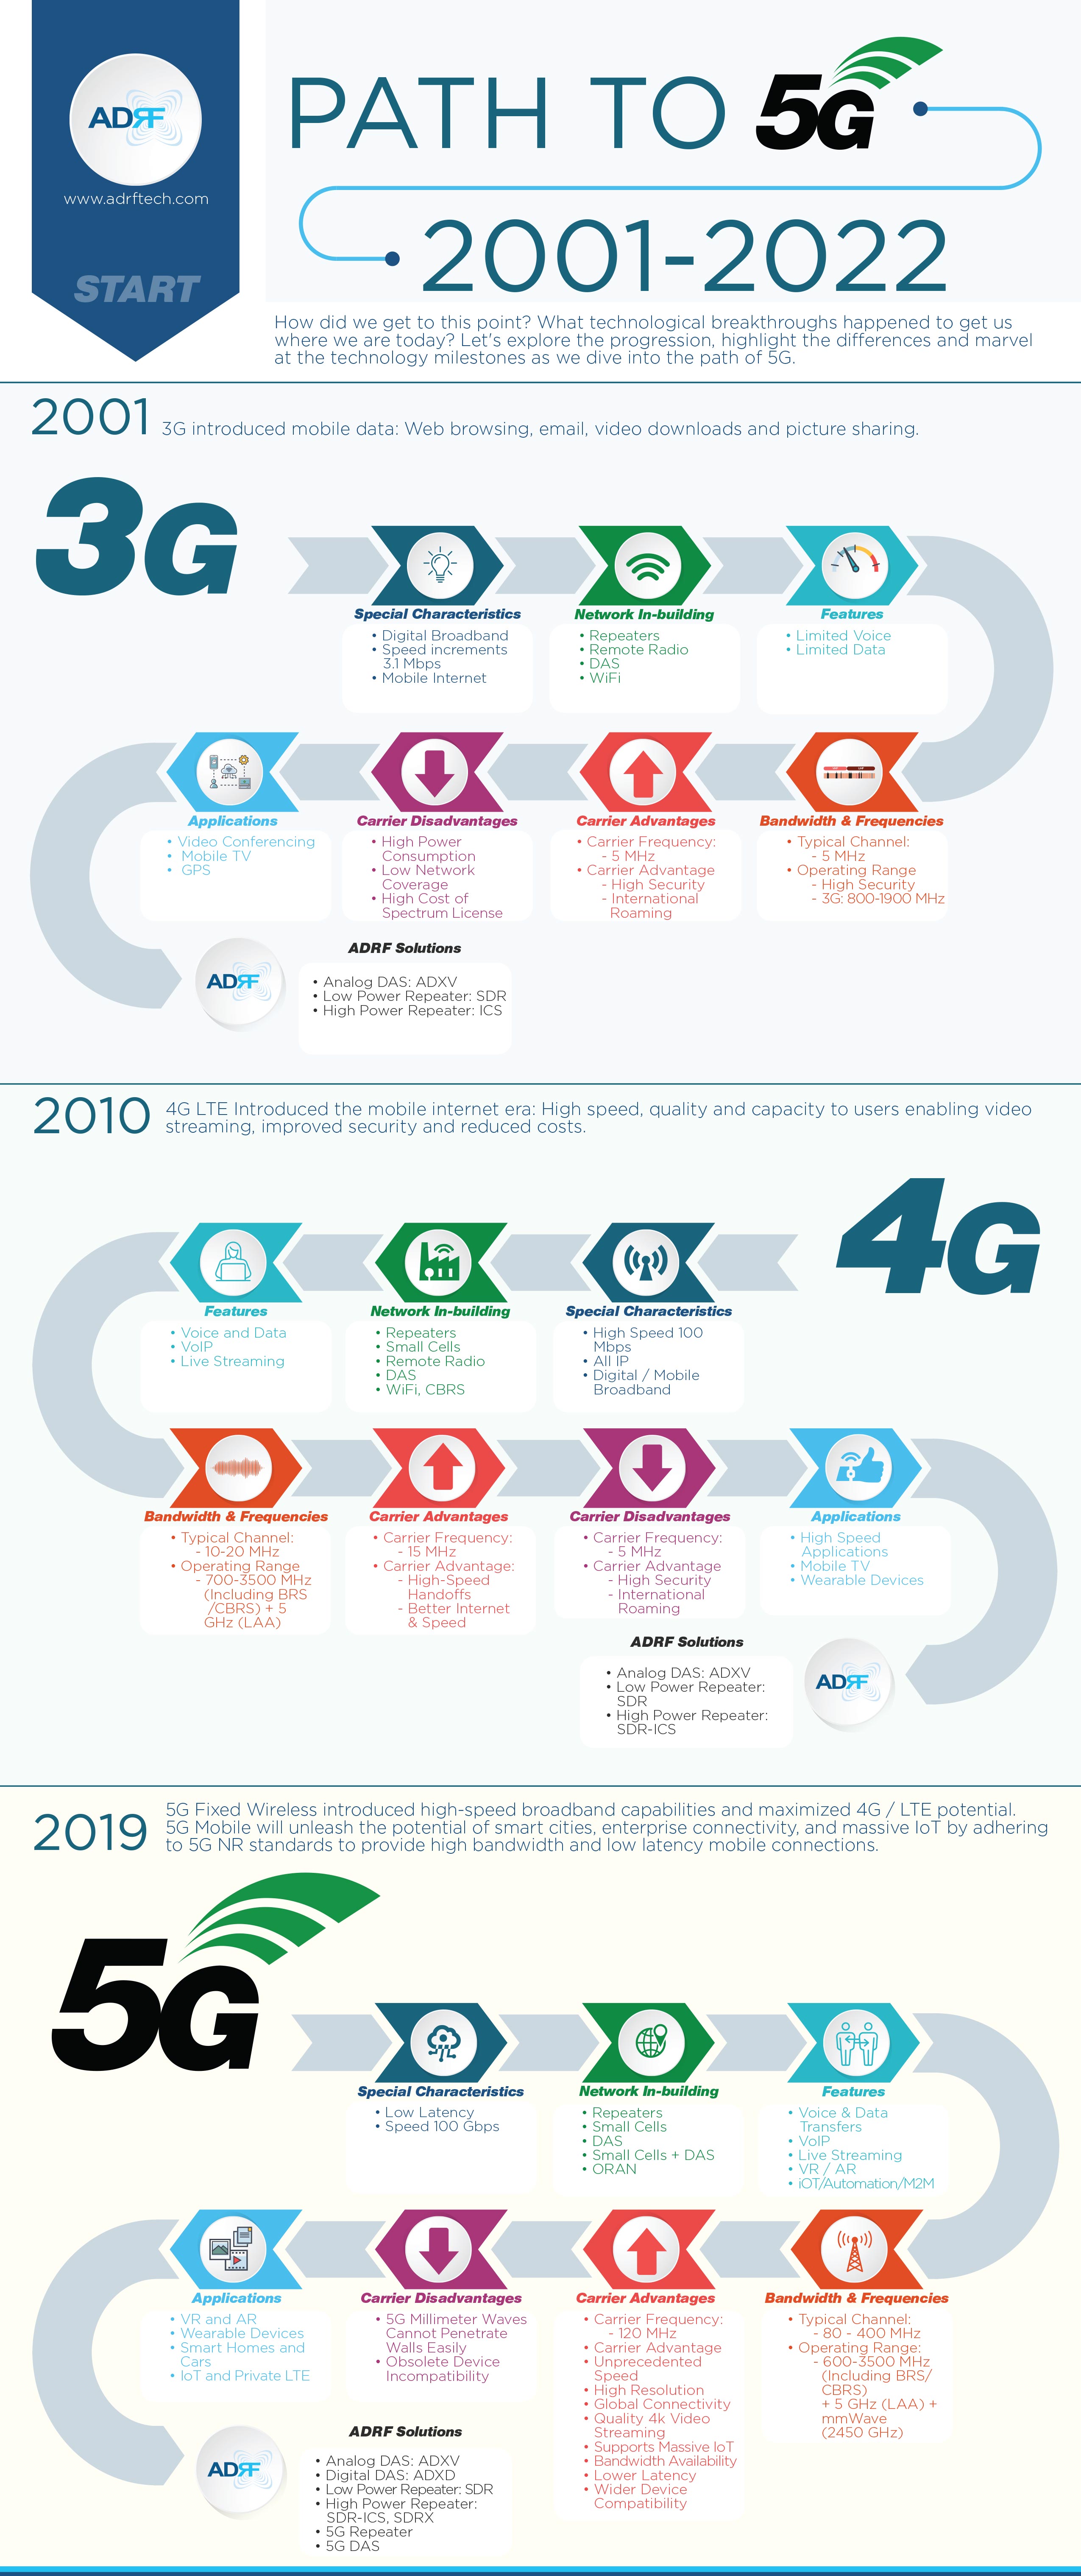 What is 5G Technology?